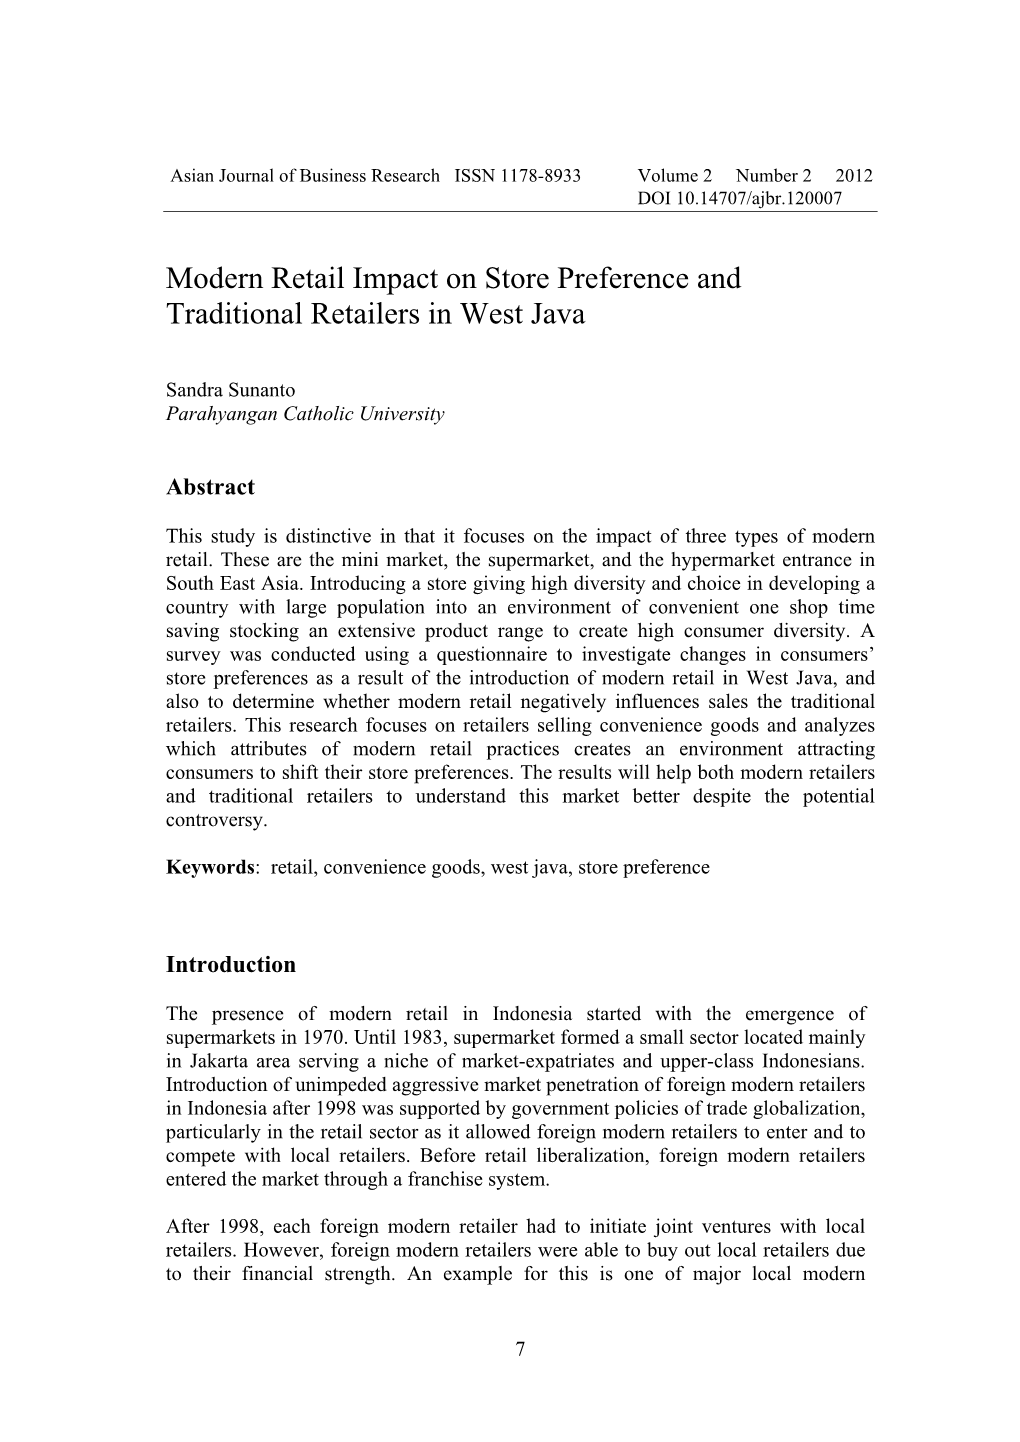 Modern Retail Impact on Store Preference and Traditional Retailers in West Java